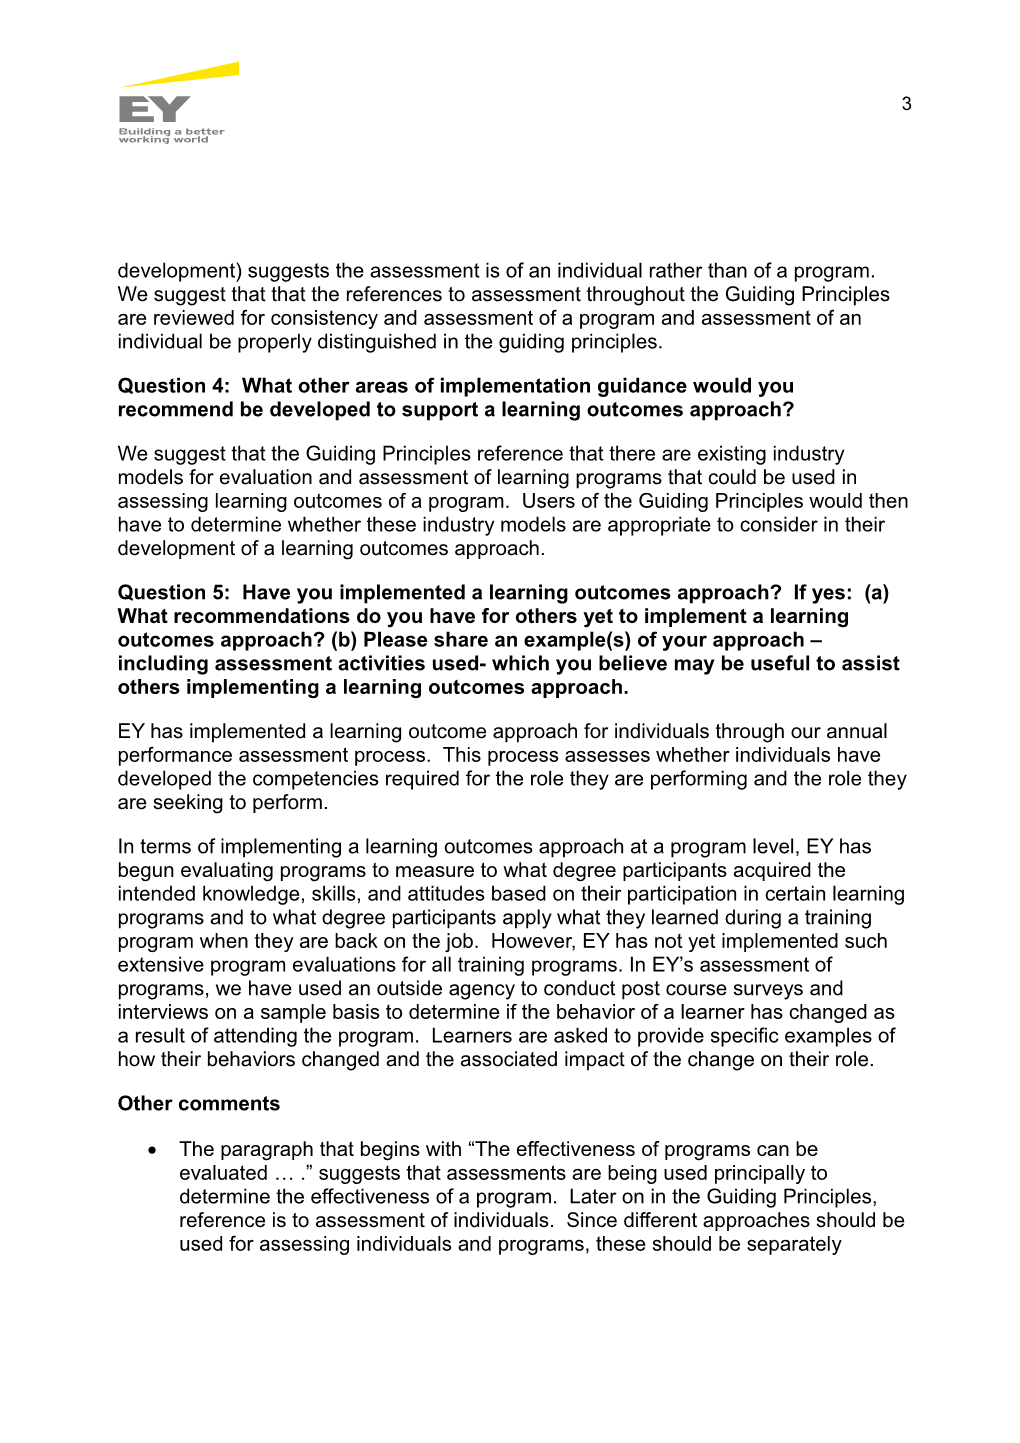 Consultation Paper Guiding Principles for Implementing a Learning Outcomes Approach